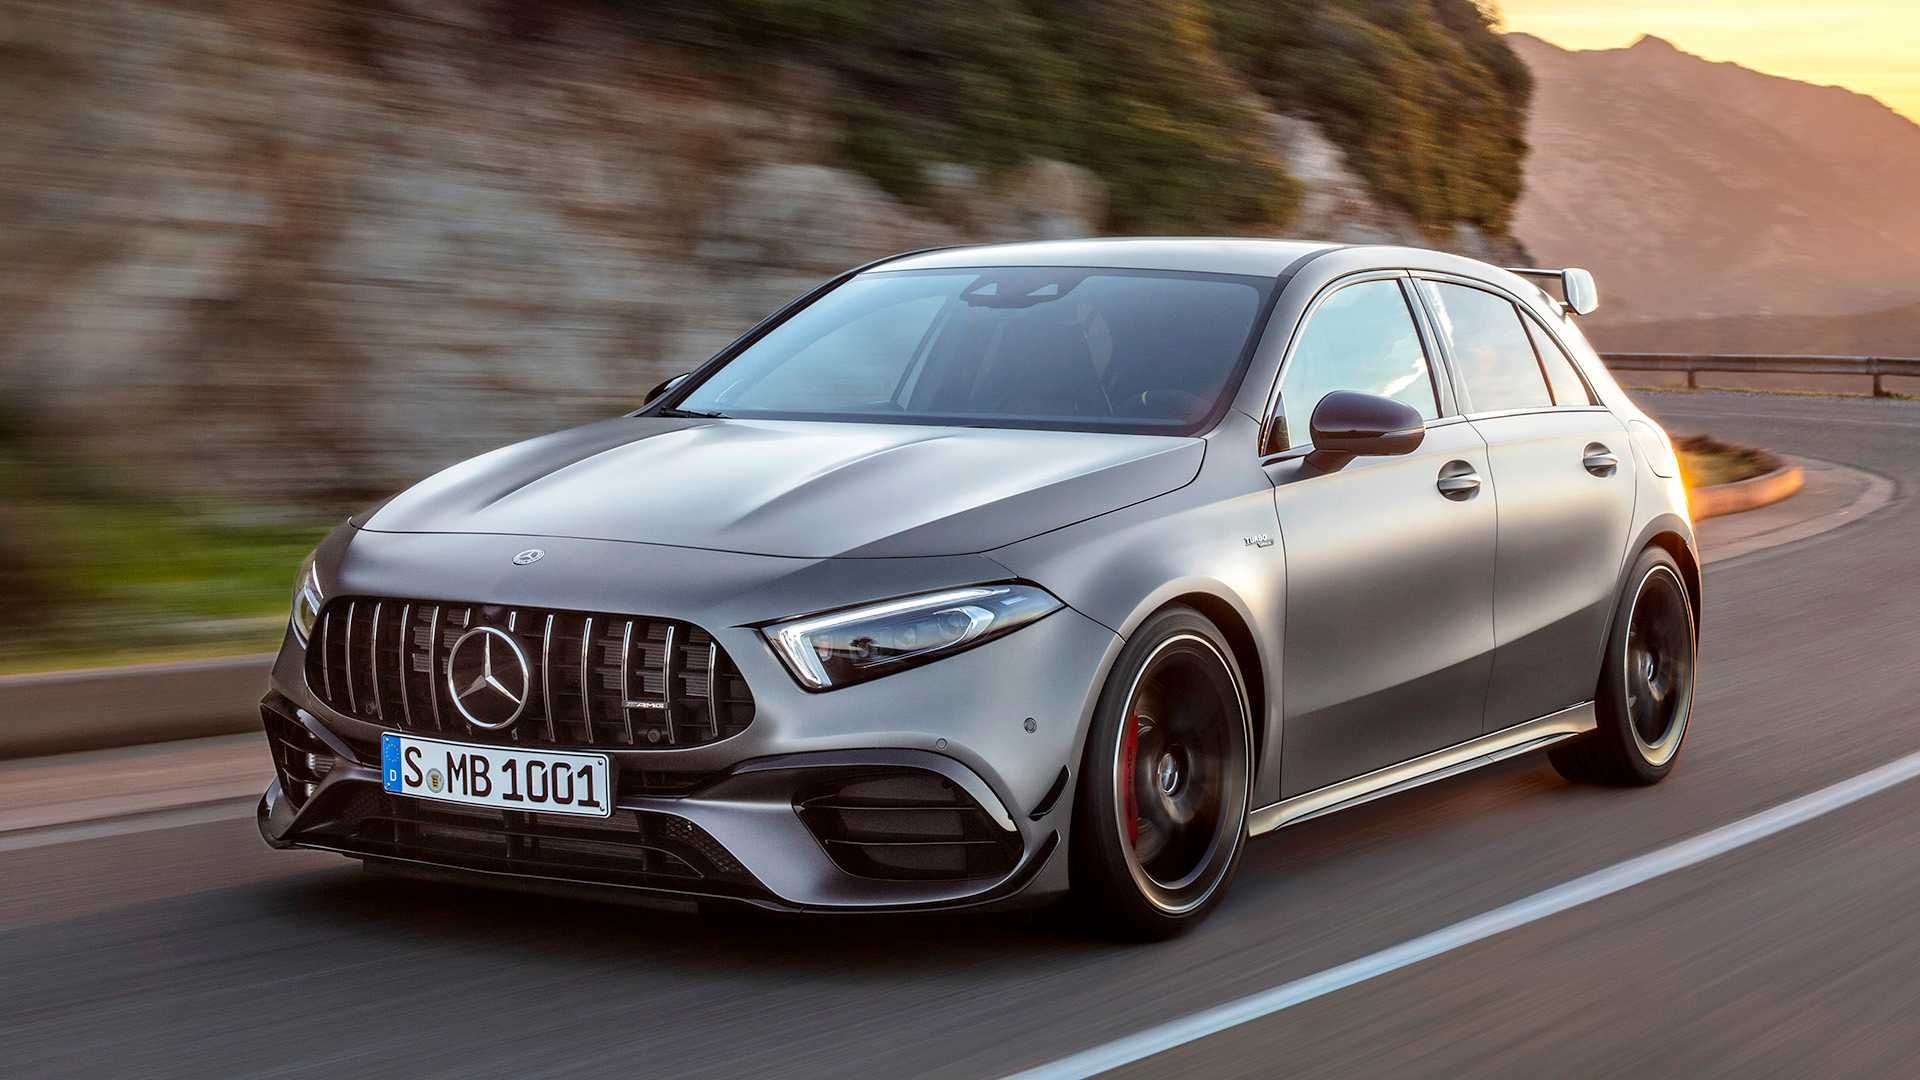  Mercedes-AMG A 45 S on the highway 